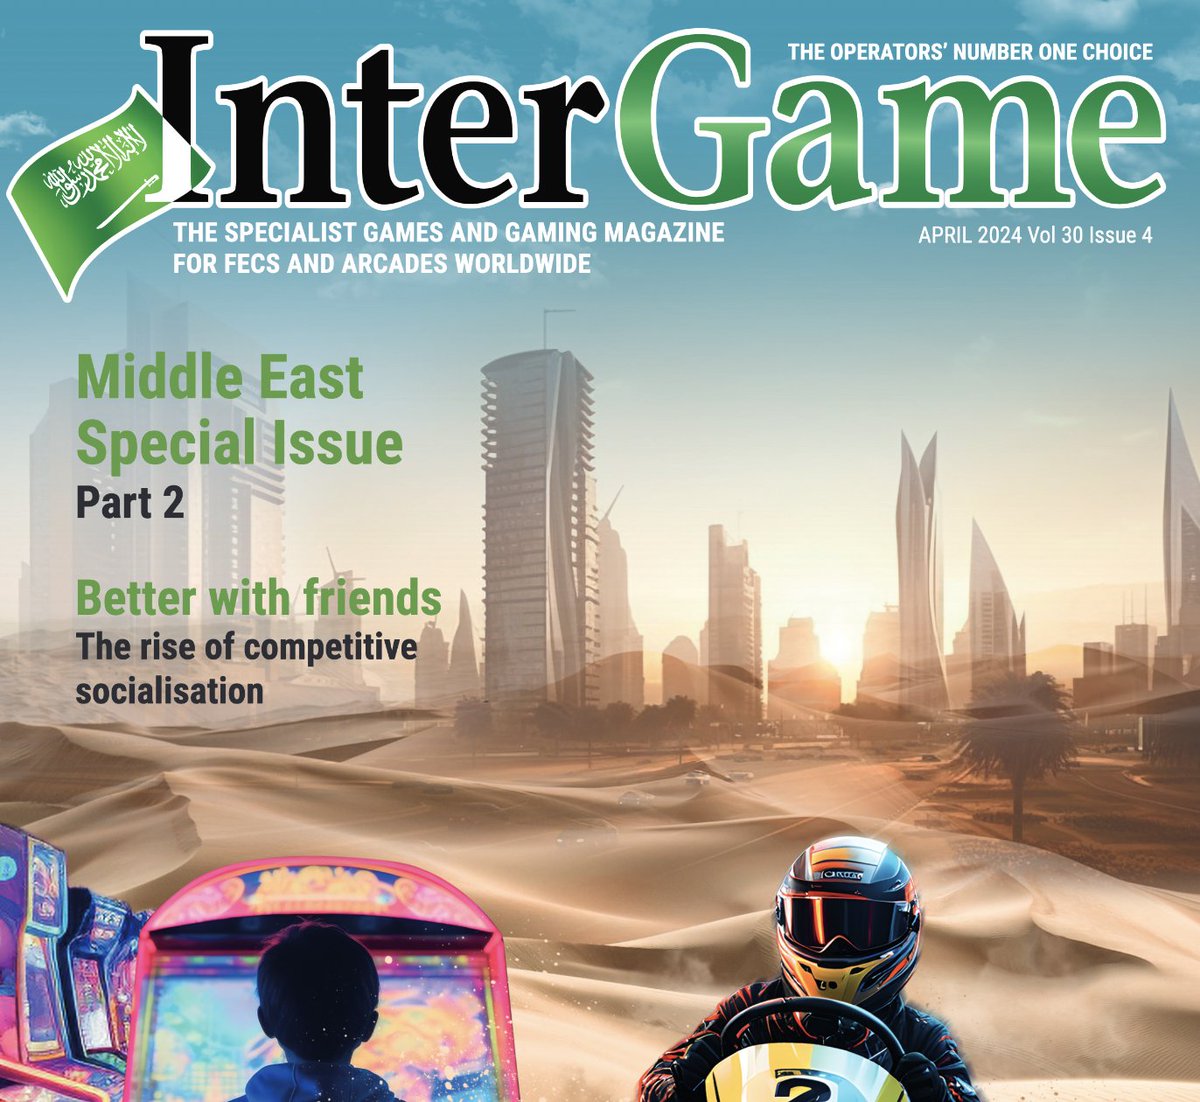 Read the April issue of InterGame here:
ow.ly/vkge50R47fe

#amusement #attractions #arcades #entertainment #MiddleEast #SEAExpo #competitivesocialisation

To be included in a future issue e-mail info@intergame.ltd.uk